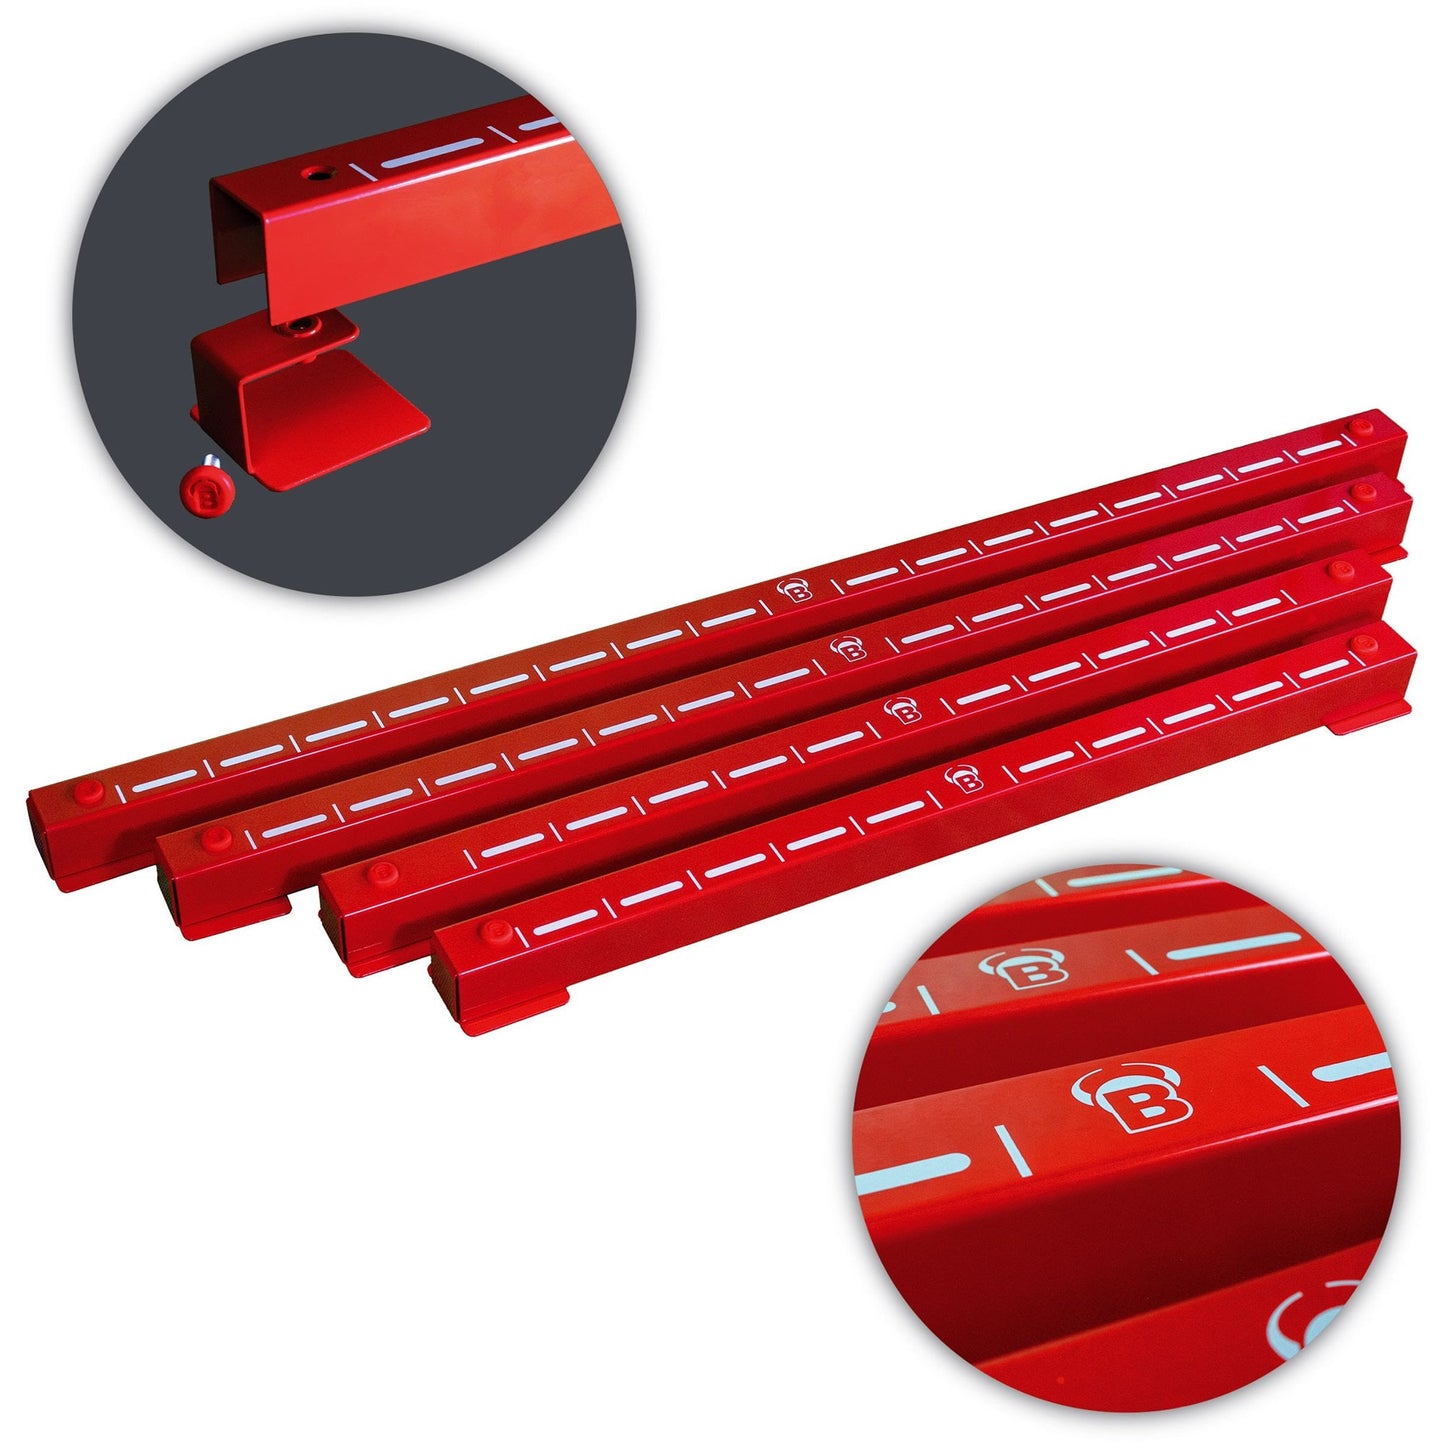 BULL'S Oky System - O66 - For Use With Dart Mats Upto 66cm Wide - Red Raised Oche